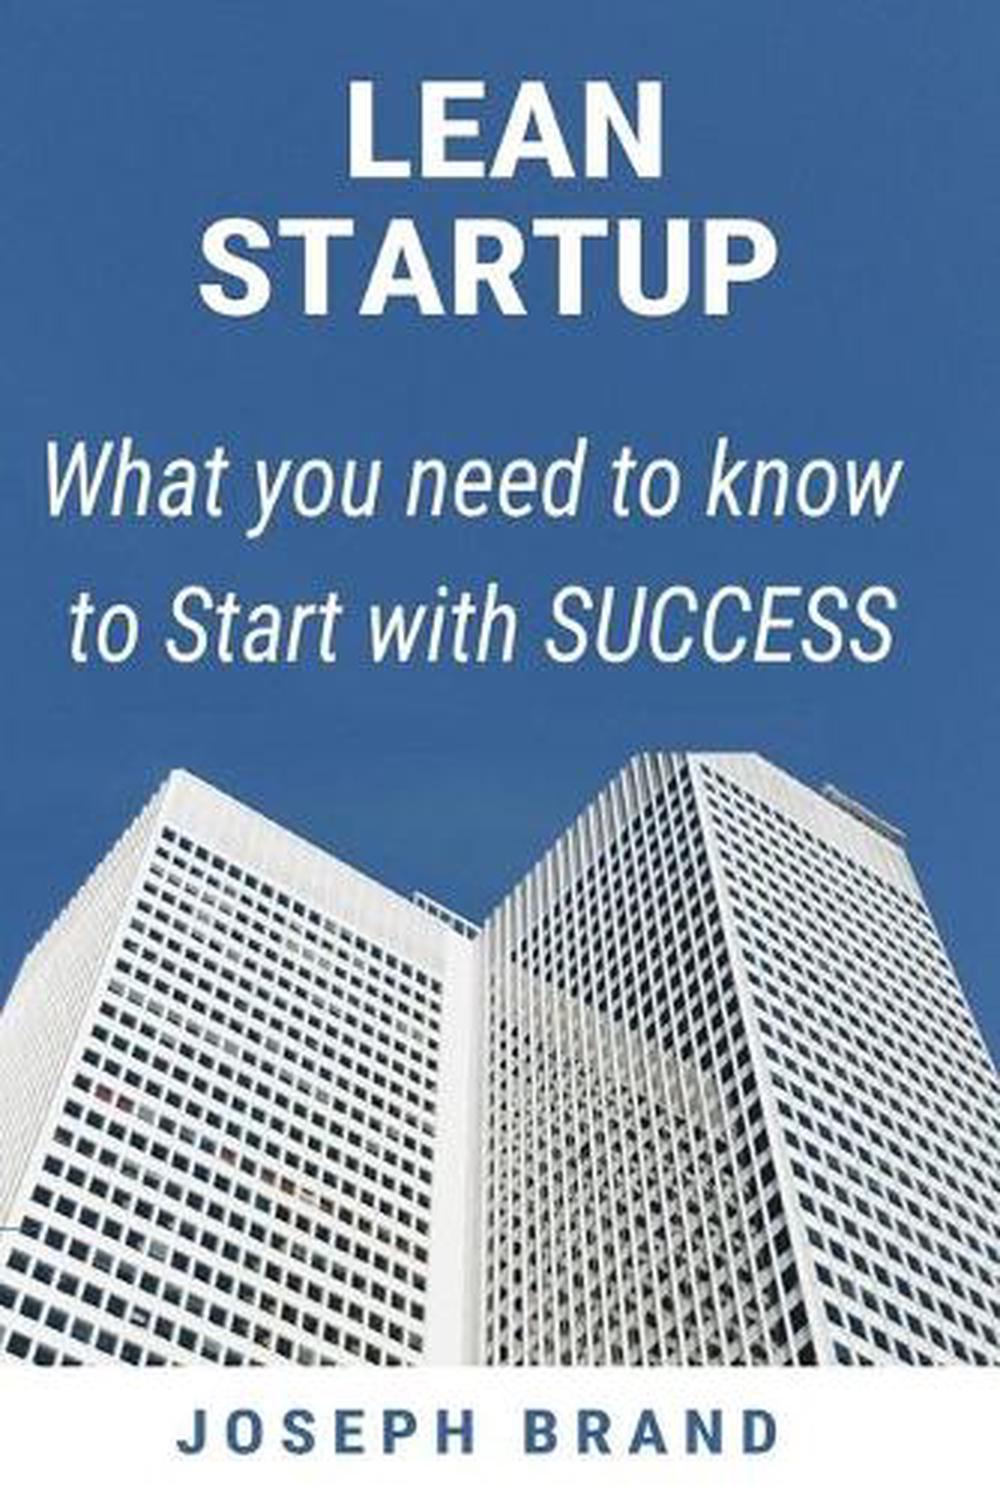 the lean start up book